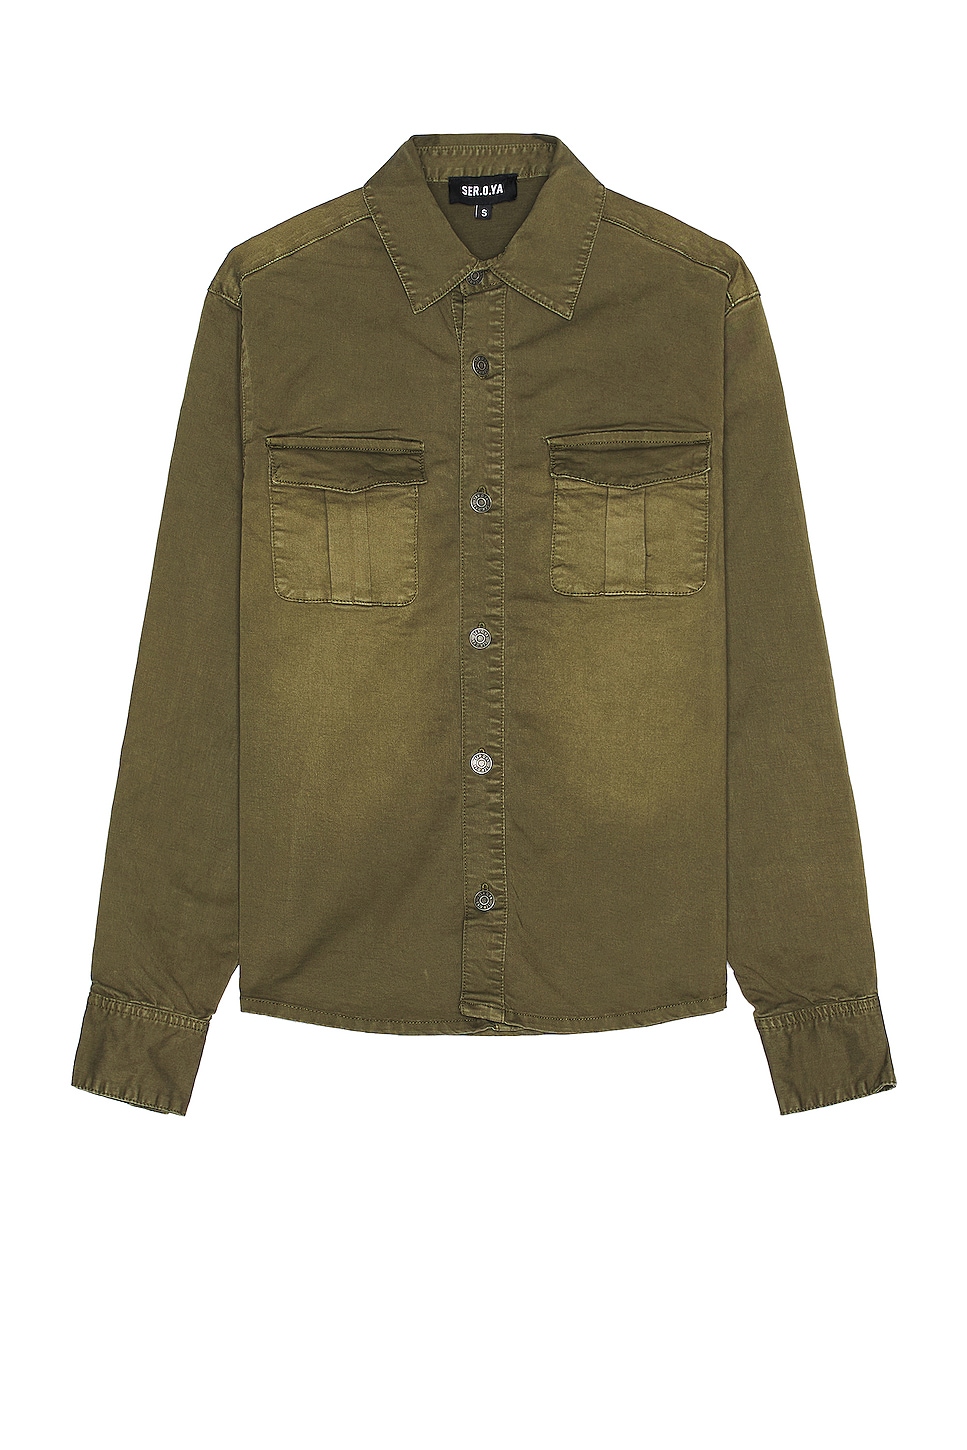 Cameron Shirt in Army